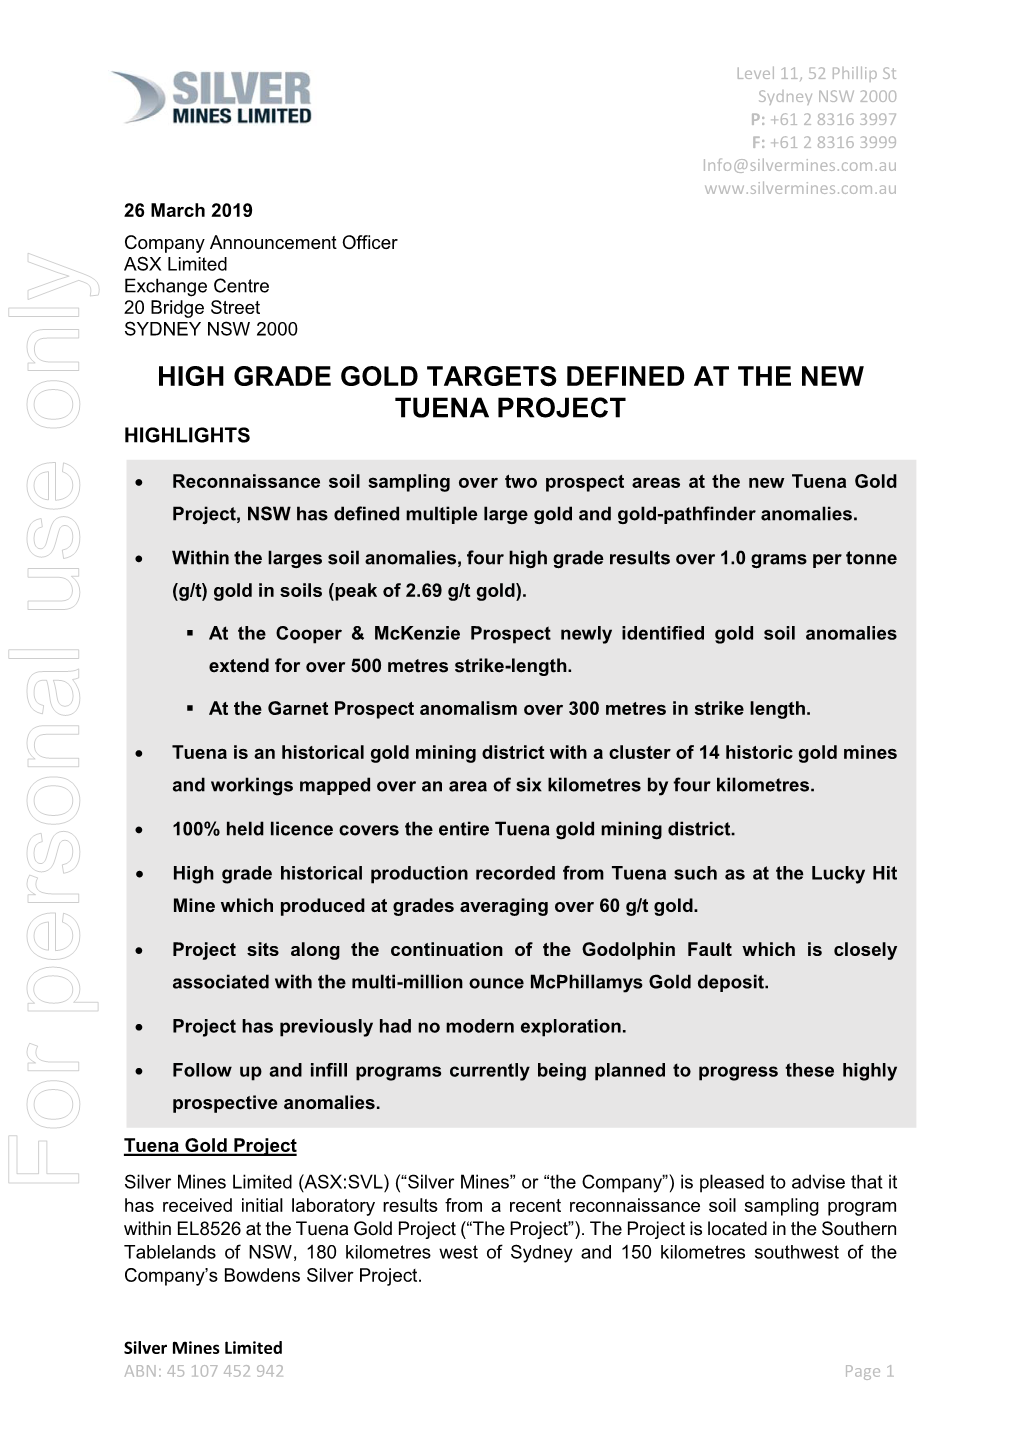 High Grade Gold Targets Defined at the New Tuena Project Highlights